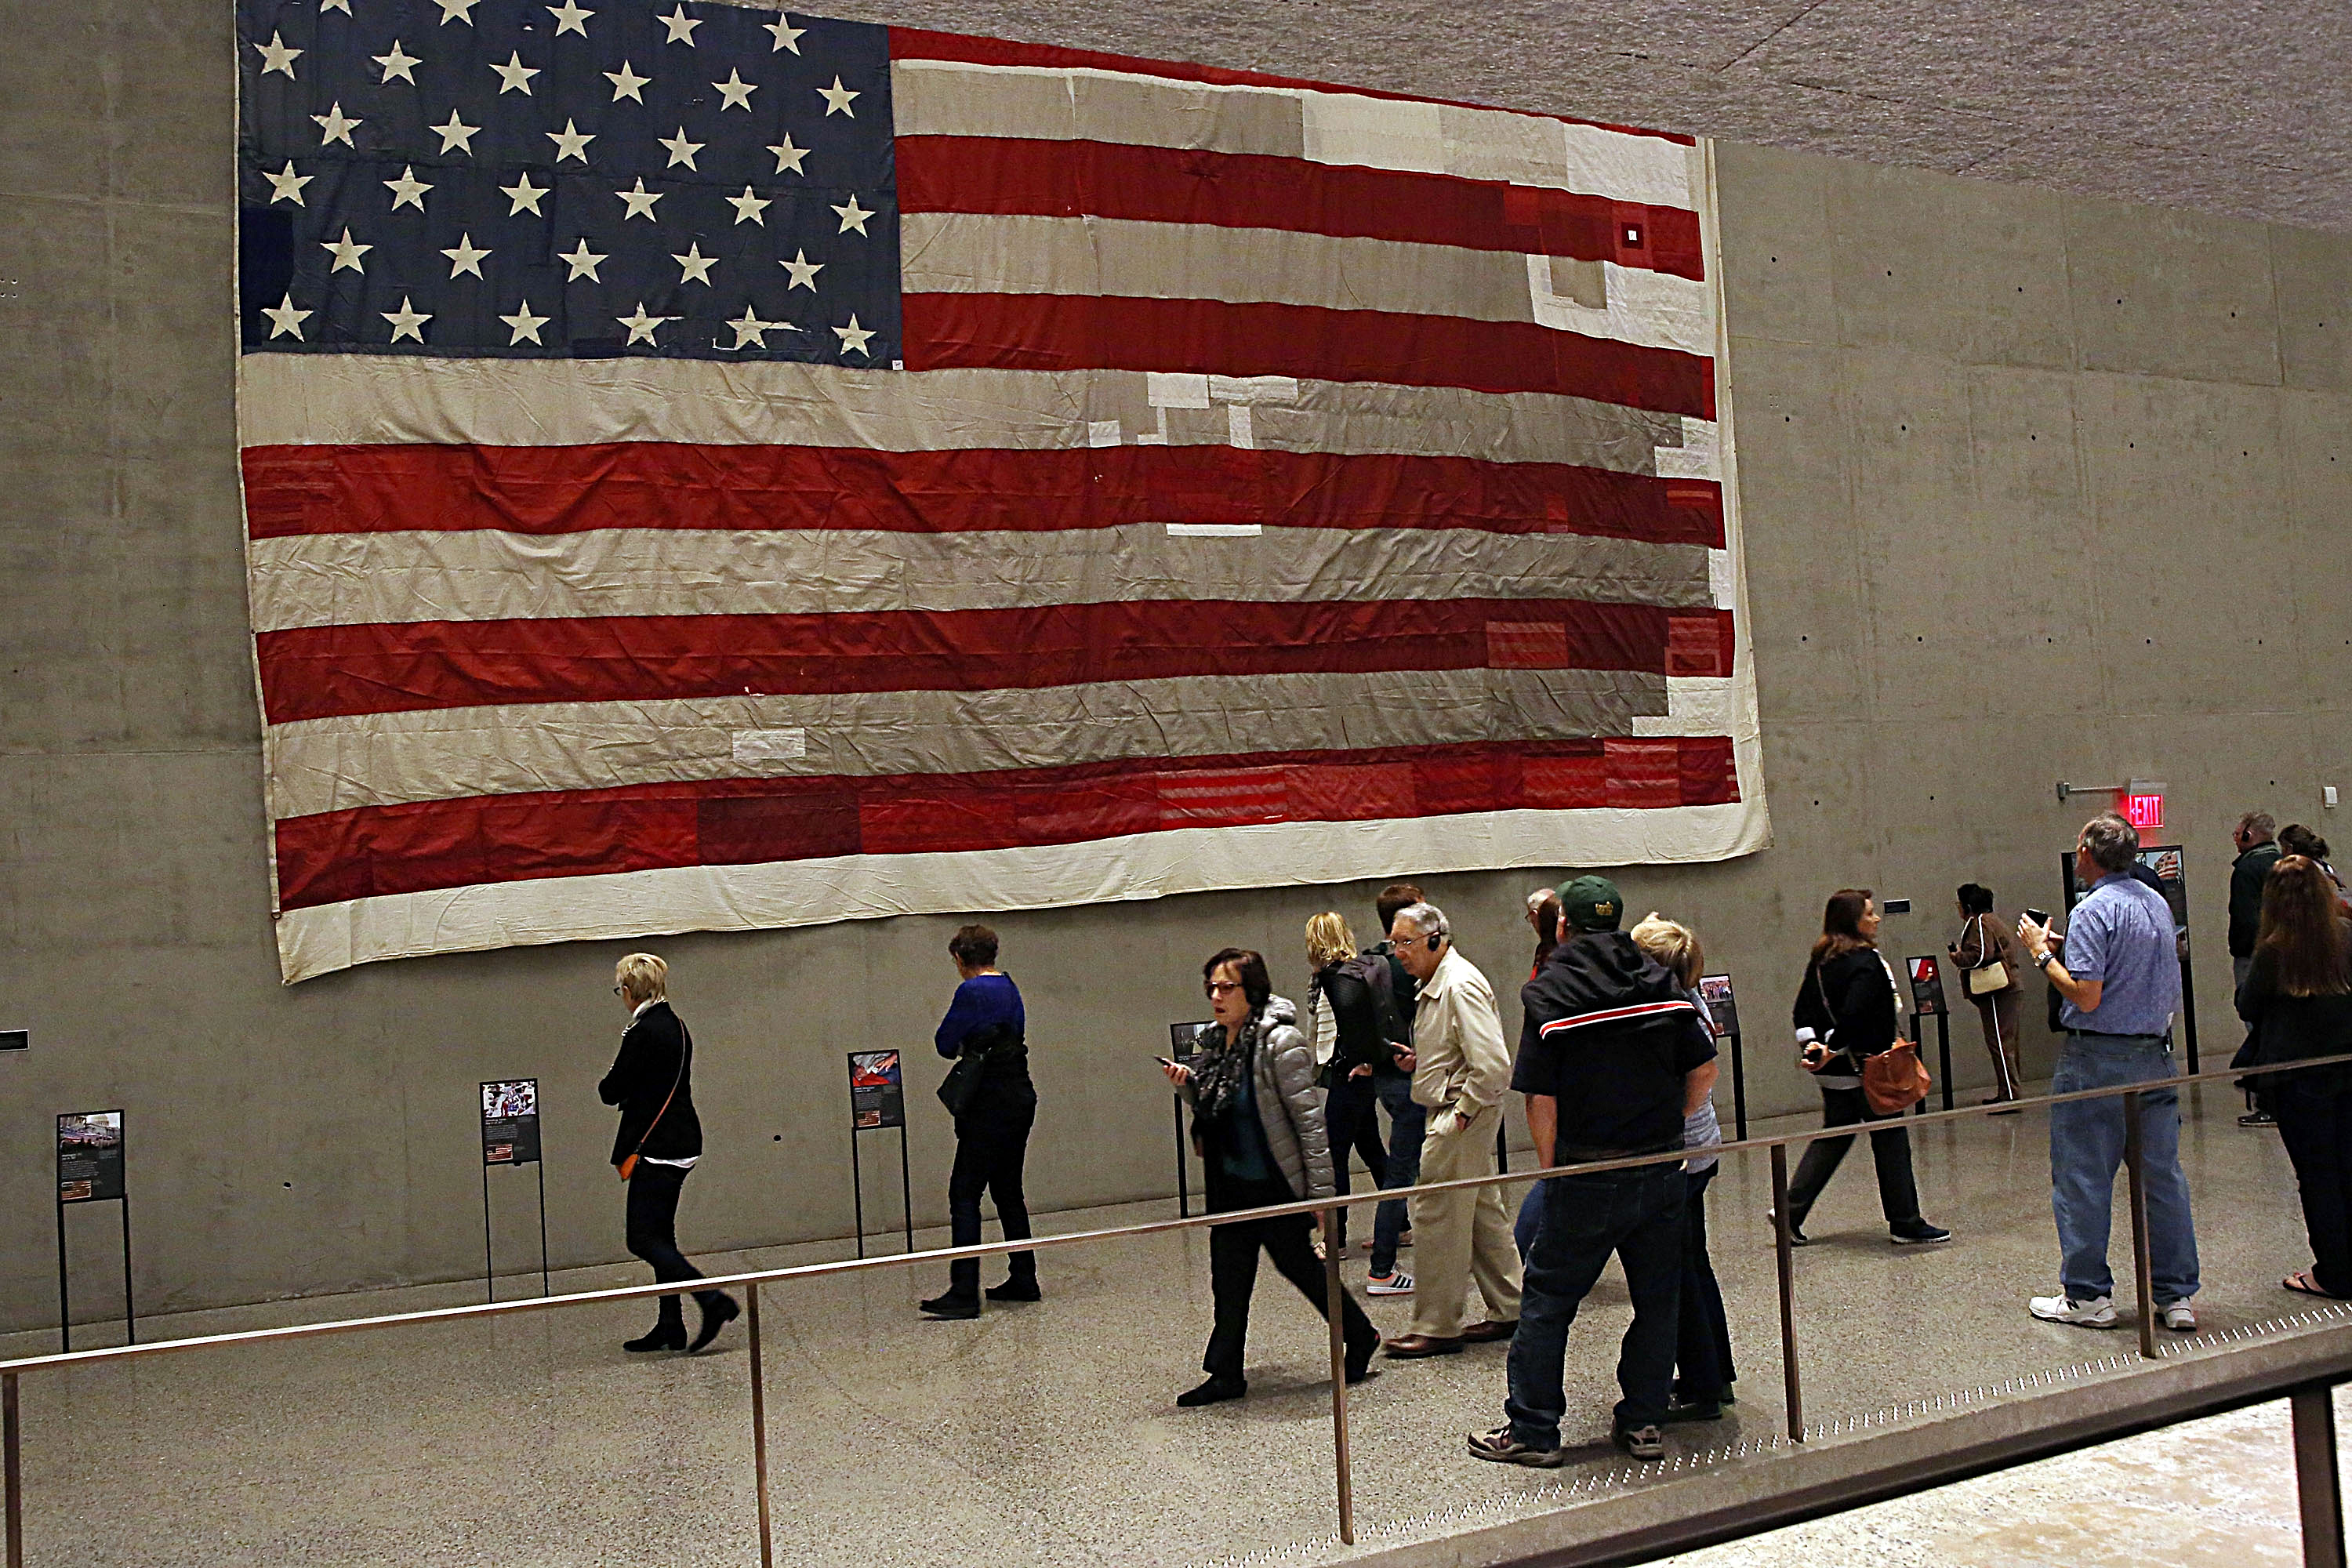 A flag recovered from Ground Zero is one of many poignant exhibits in the September 11 Memorial Museum. Image by Getty Images